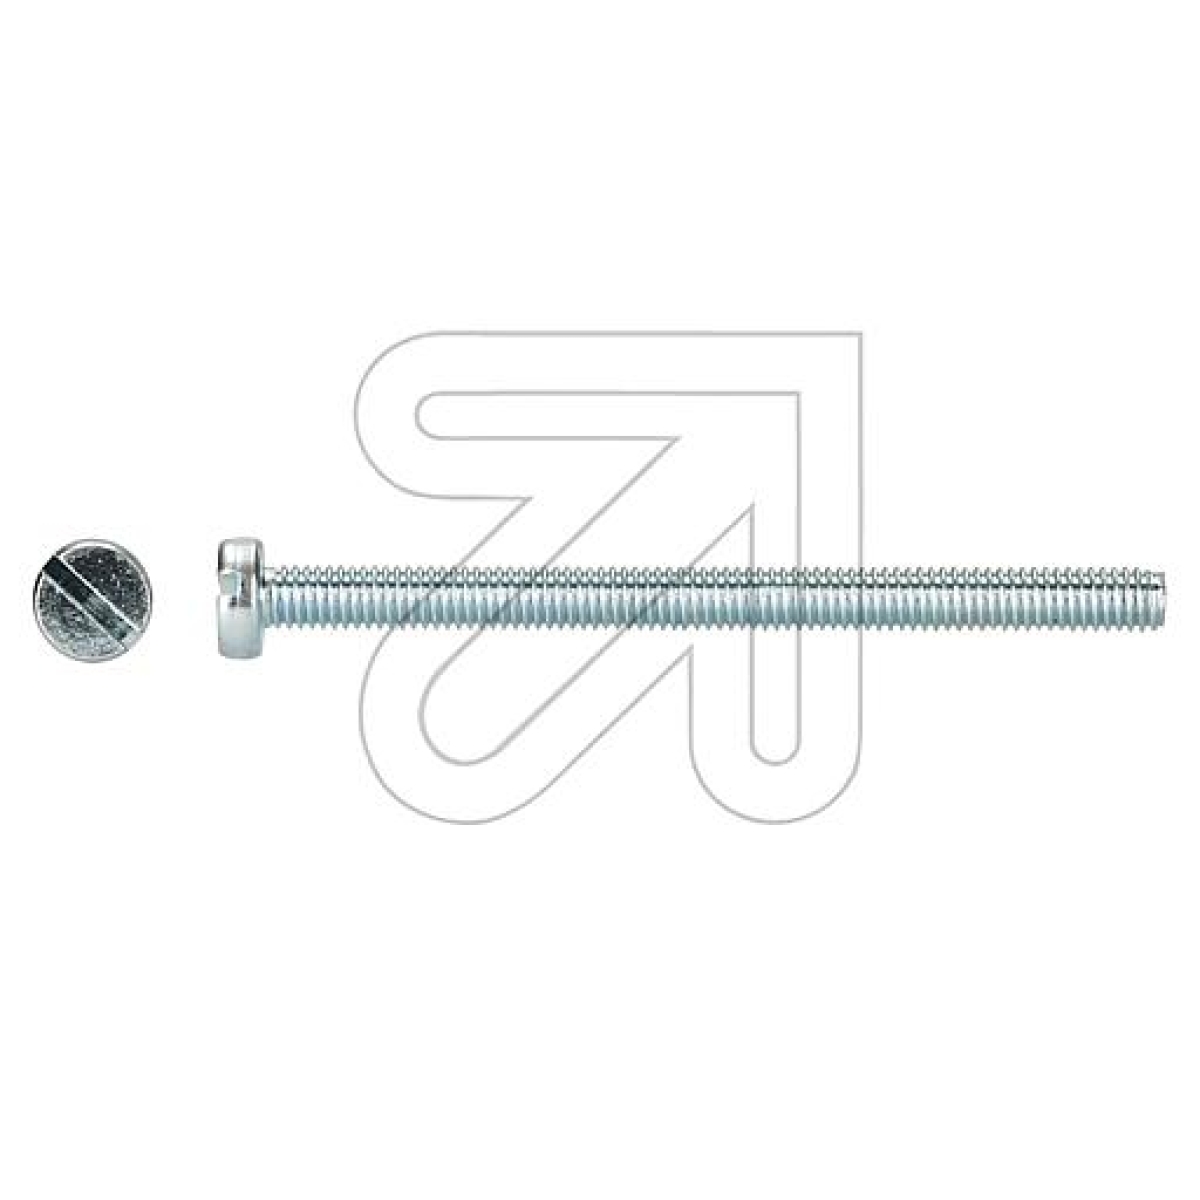 EGBSlotted cylinder screws M3x40-Price for 100 pcs.Article-No: 196225